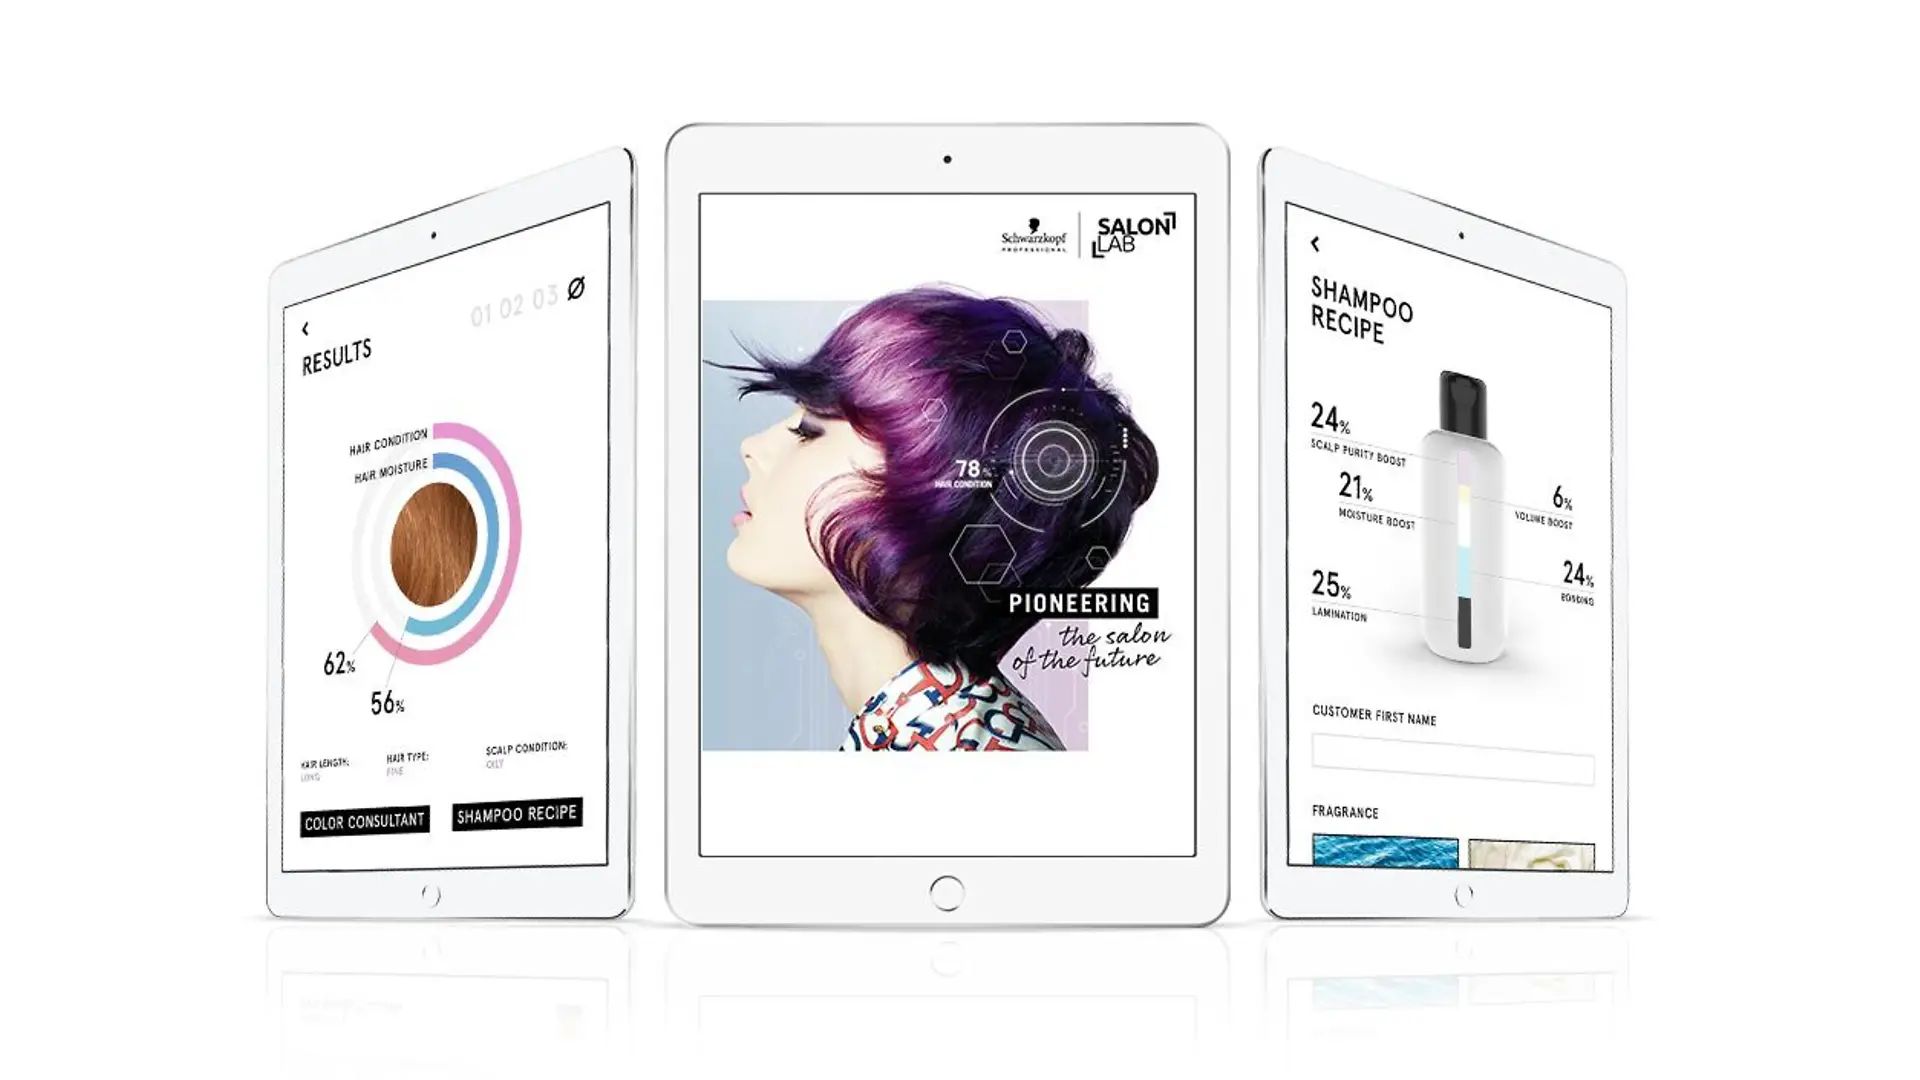 
The SalonLab Consultant App supports the hairdresser throughout the analysis, displaying the client's individual hair diagnostic results and enabling a personal color consultation with state-of-the-art augmented reality technology.